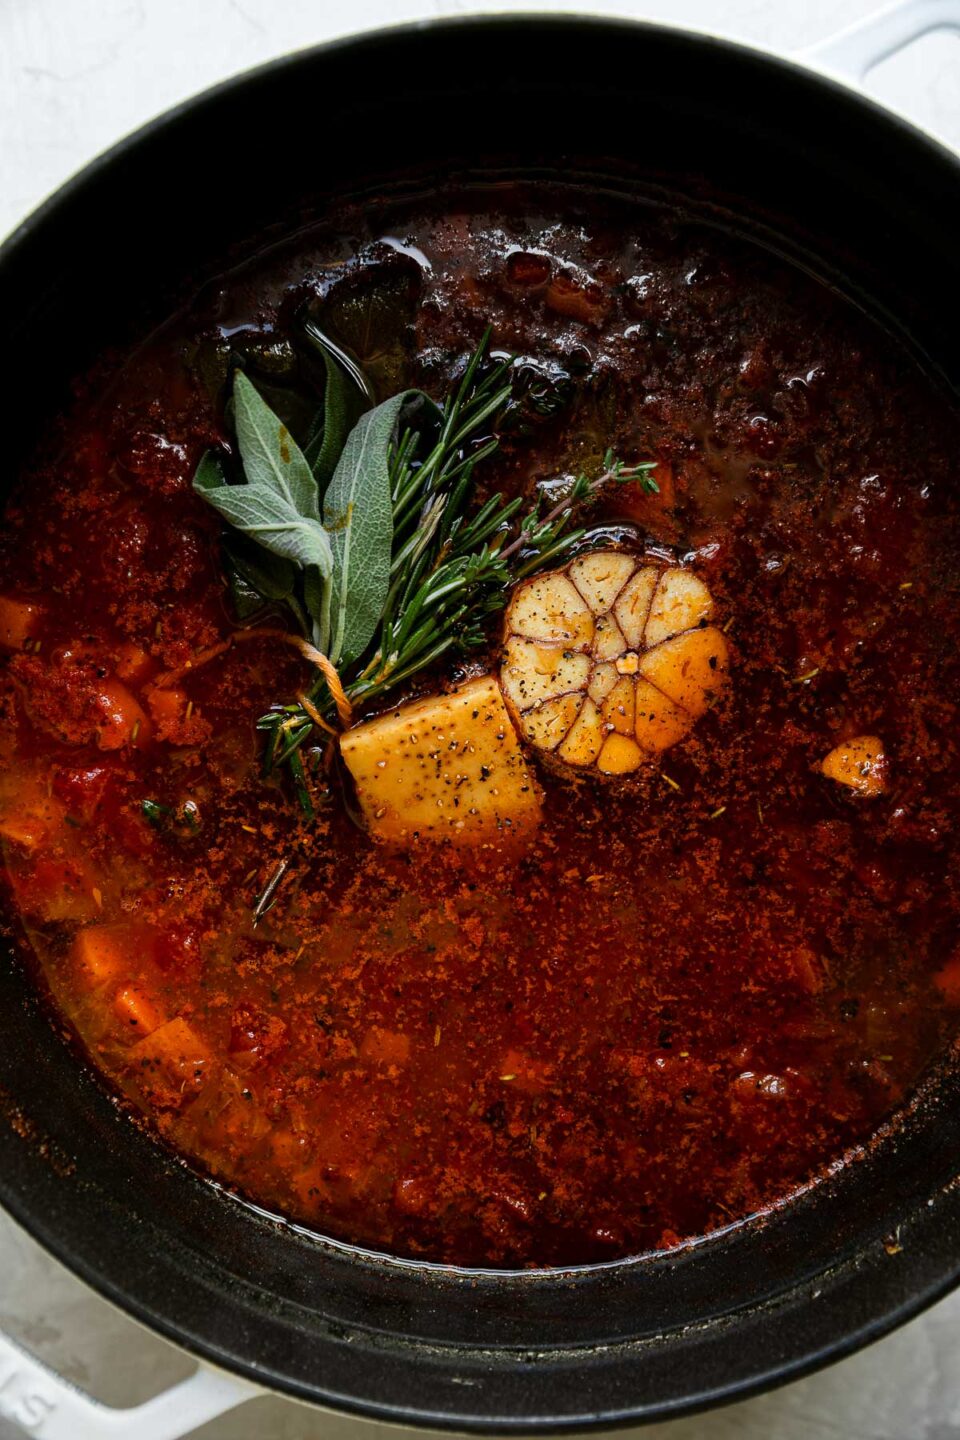 Ribollita soup broth fills a white Stab cocotte. Garlic, bay leaves, parmesan rind, & fresh herbs have been added to the broth to flavor. The cocotte sits atop a creamy white textured surface.